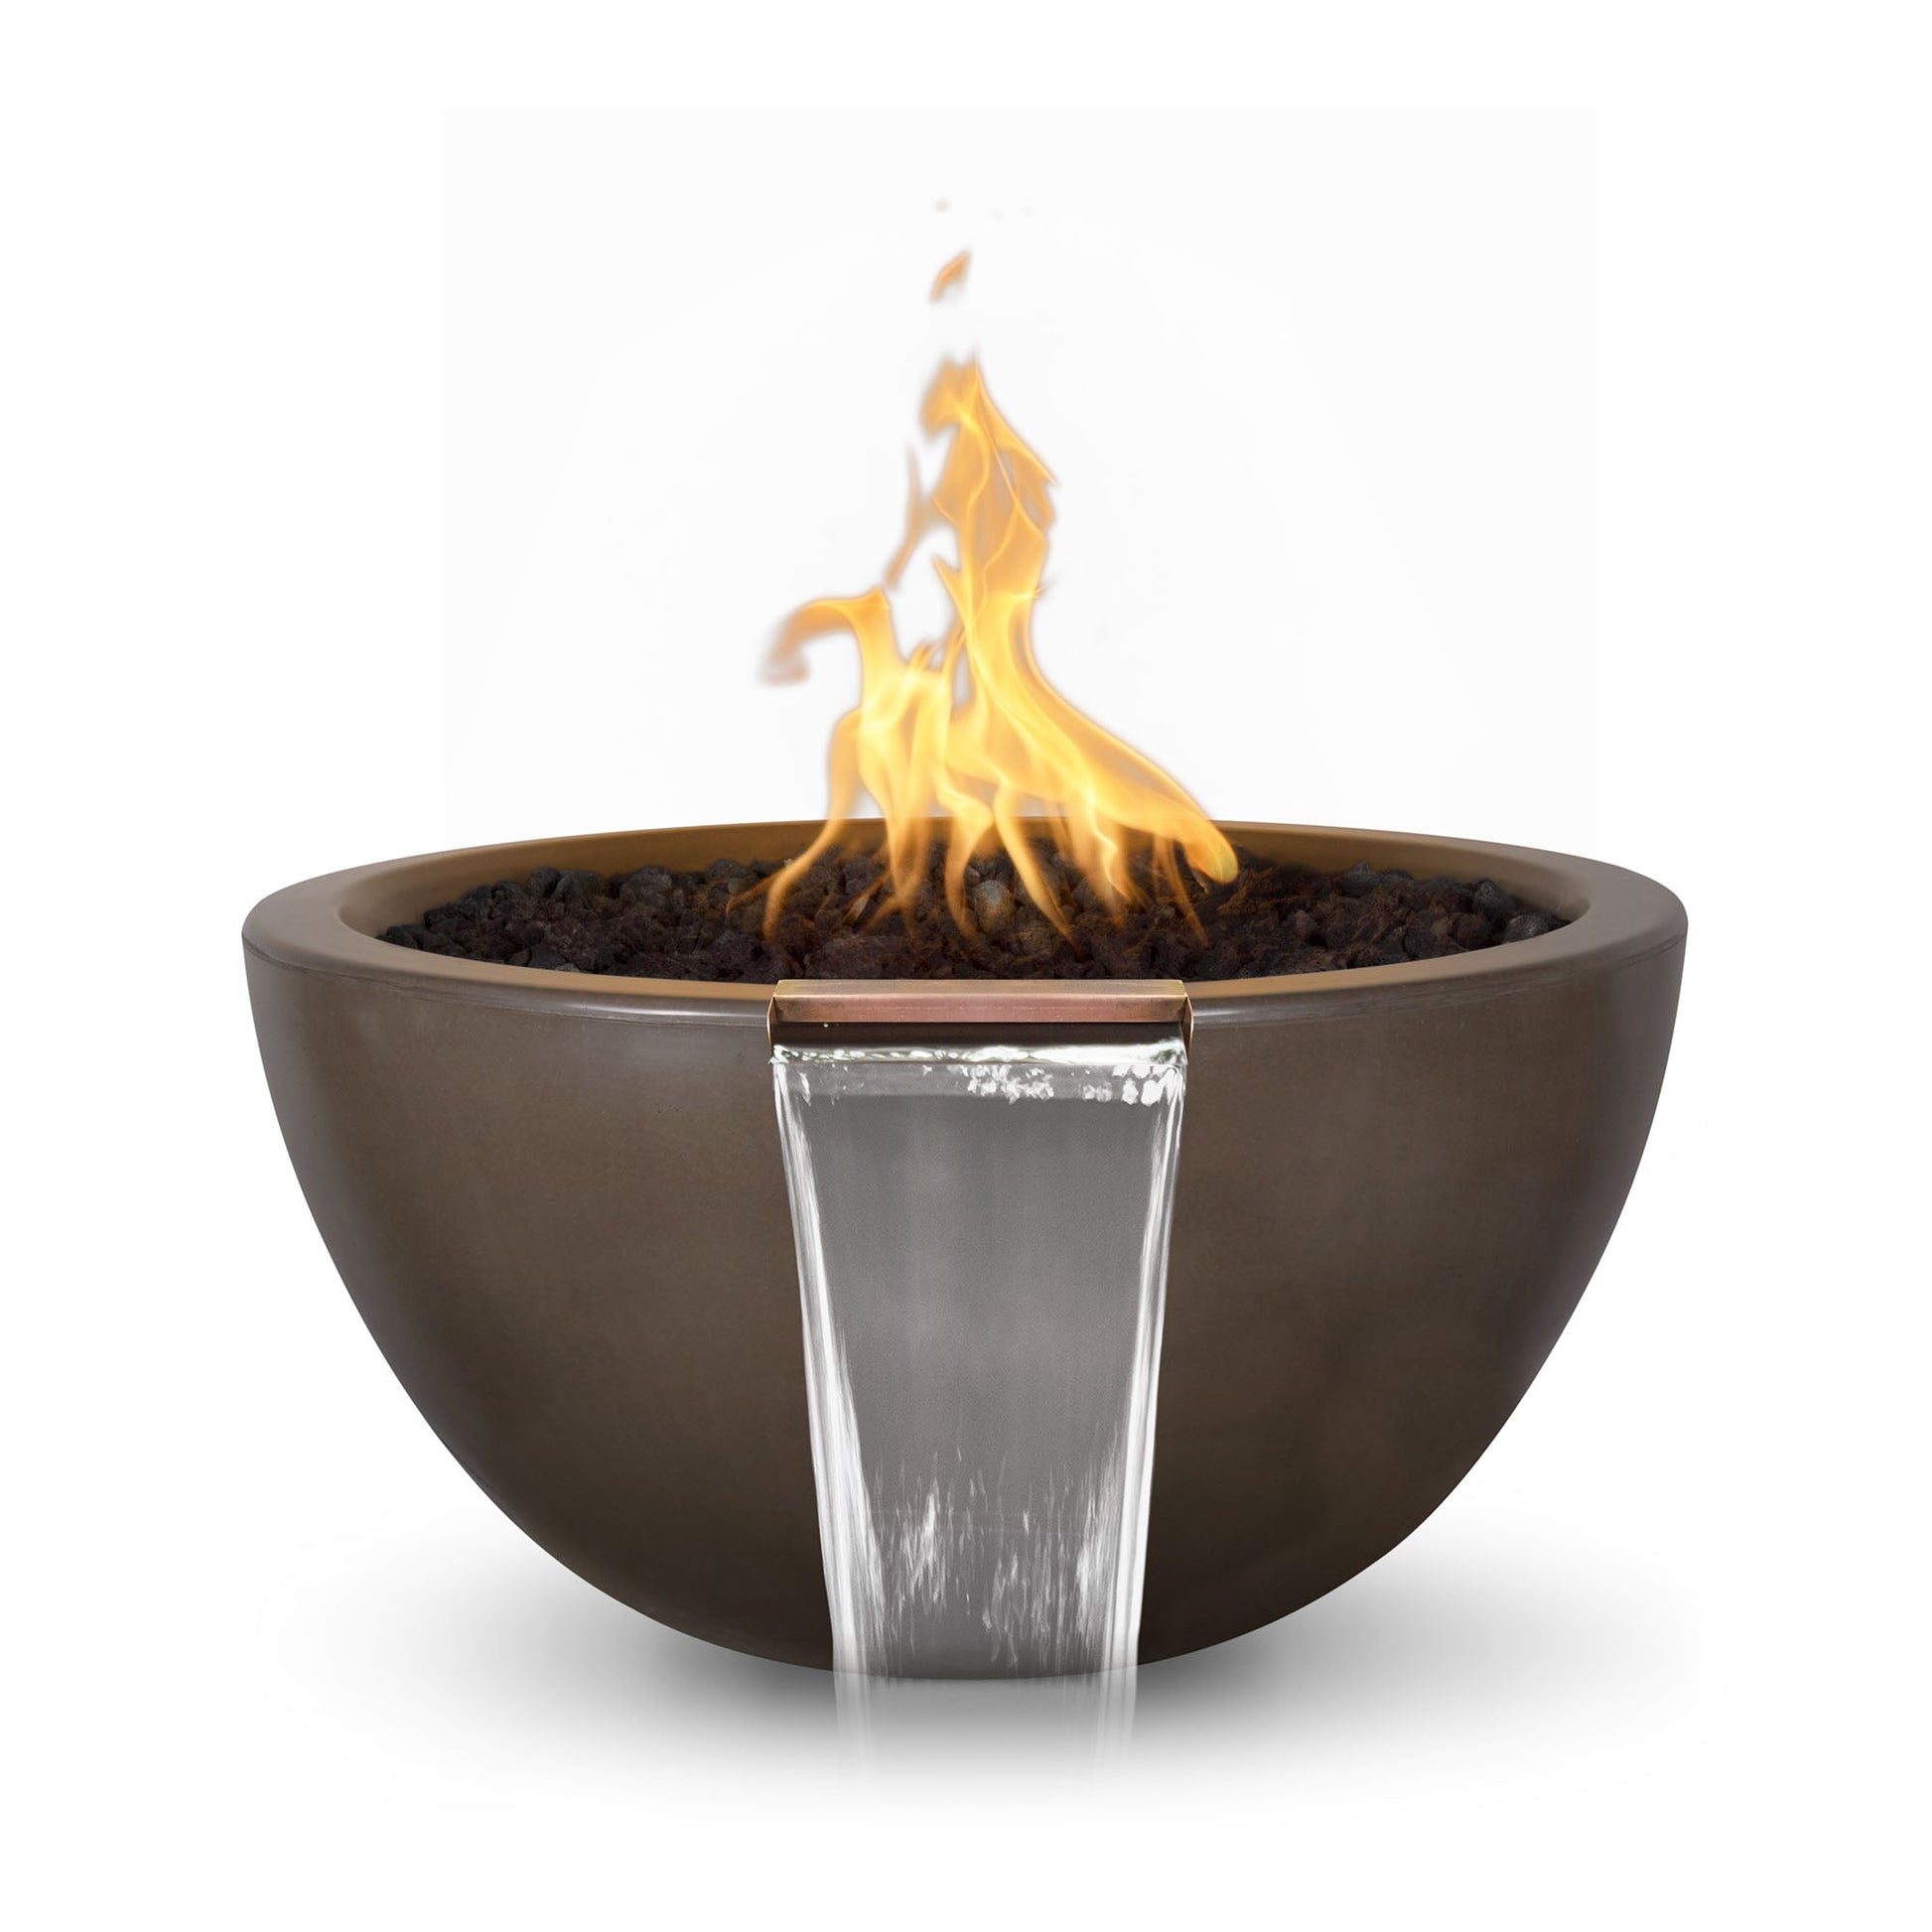 The Outdoor Plus Round Luna 30" Chocolate GFRC Concrete Liquid Propane Fire & Water Bowl with Match Lit with Flame Sense Ignition